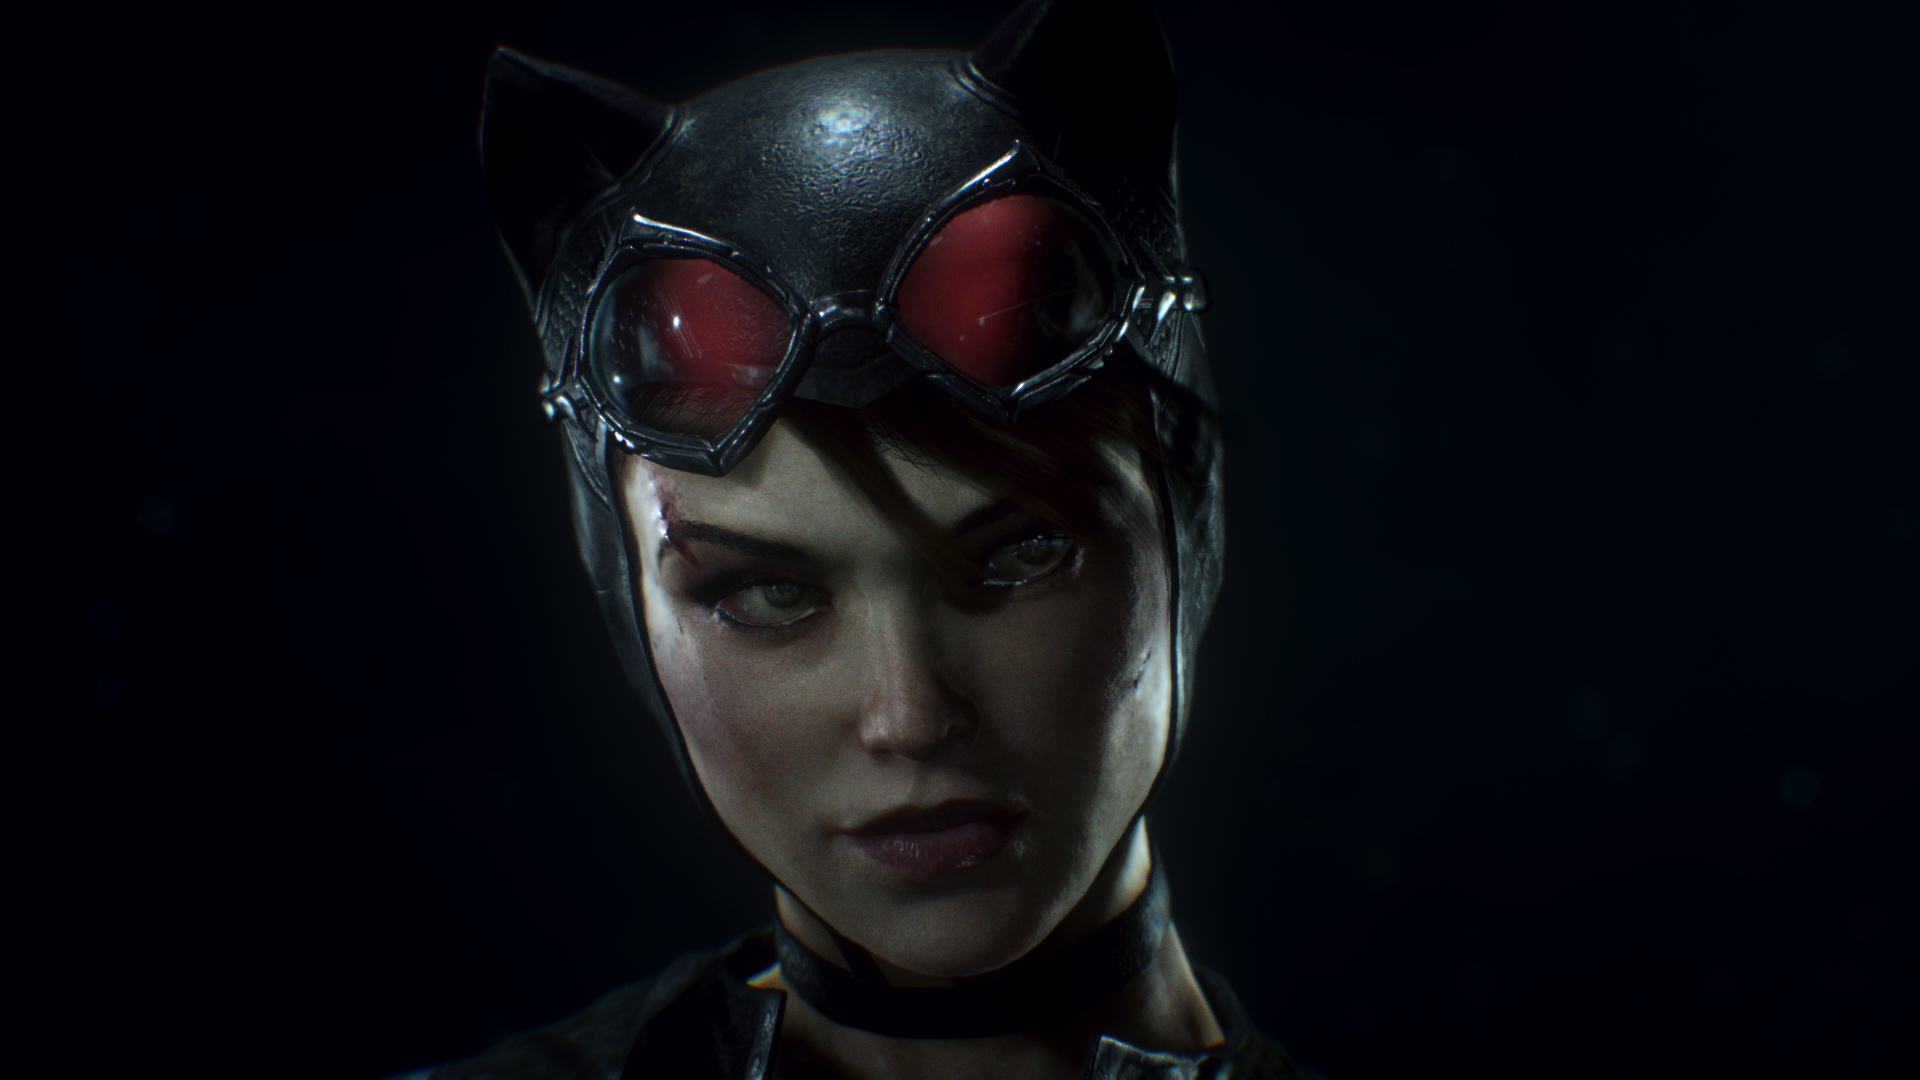 Desktop Wallpaper Catwoman, Batman: Arkham Knight, Video Game, Face, Hd  Image, Picture, Background, Fy63by